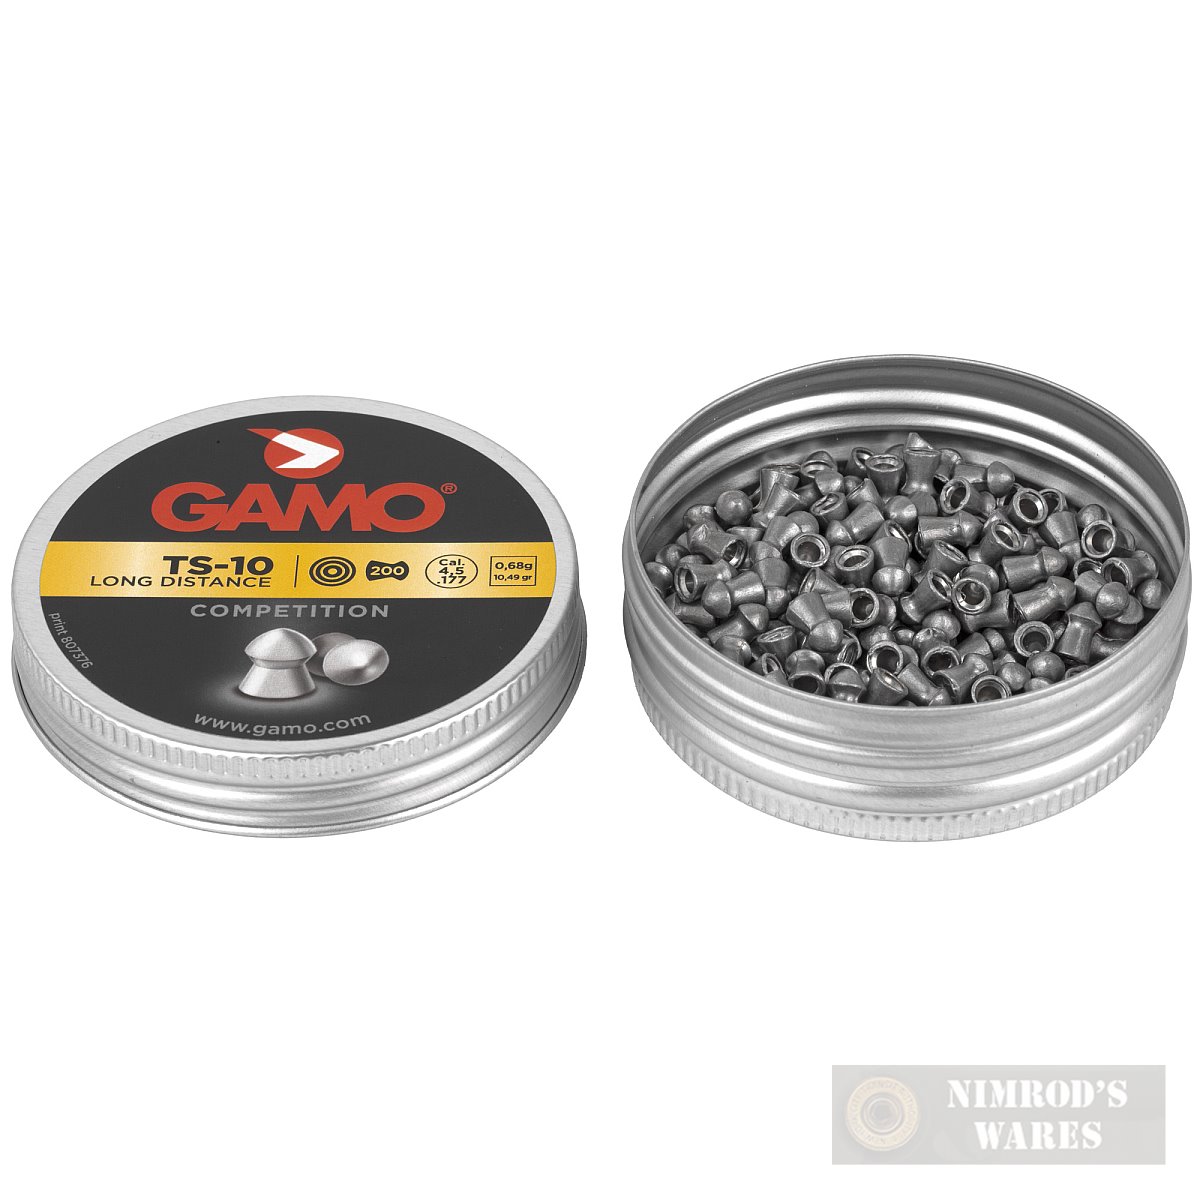 Gamo TS-10 LONG DISTANCE COMPETITION .177 Pellets Domed 6321748BT54-img-2